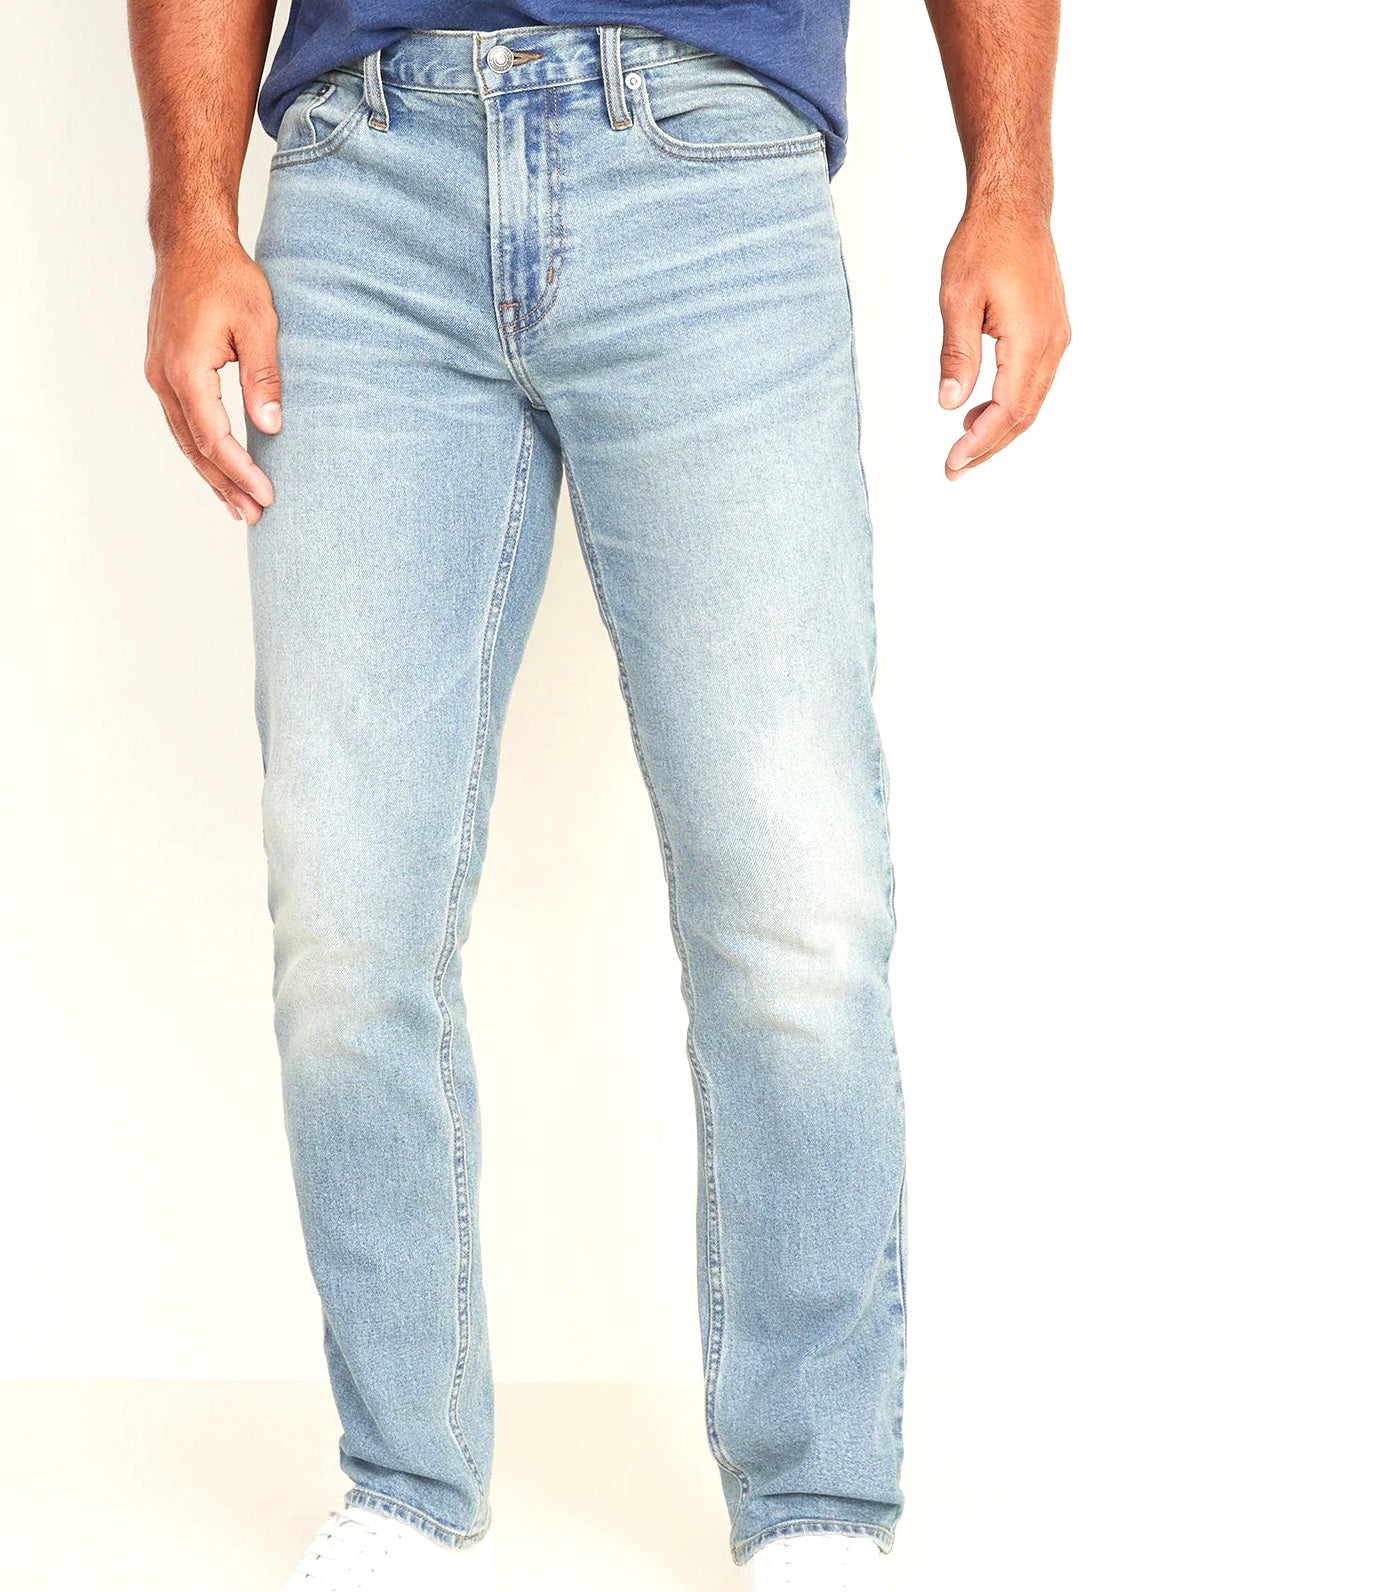 Straight Built-In Flex Light-Wash Jeans For Men - Old Navy Philippines